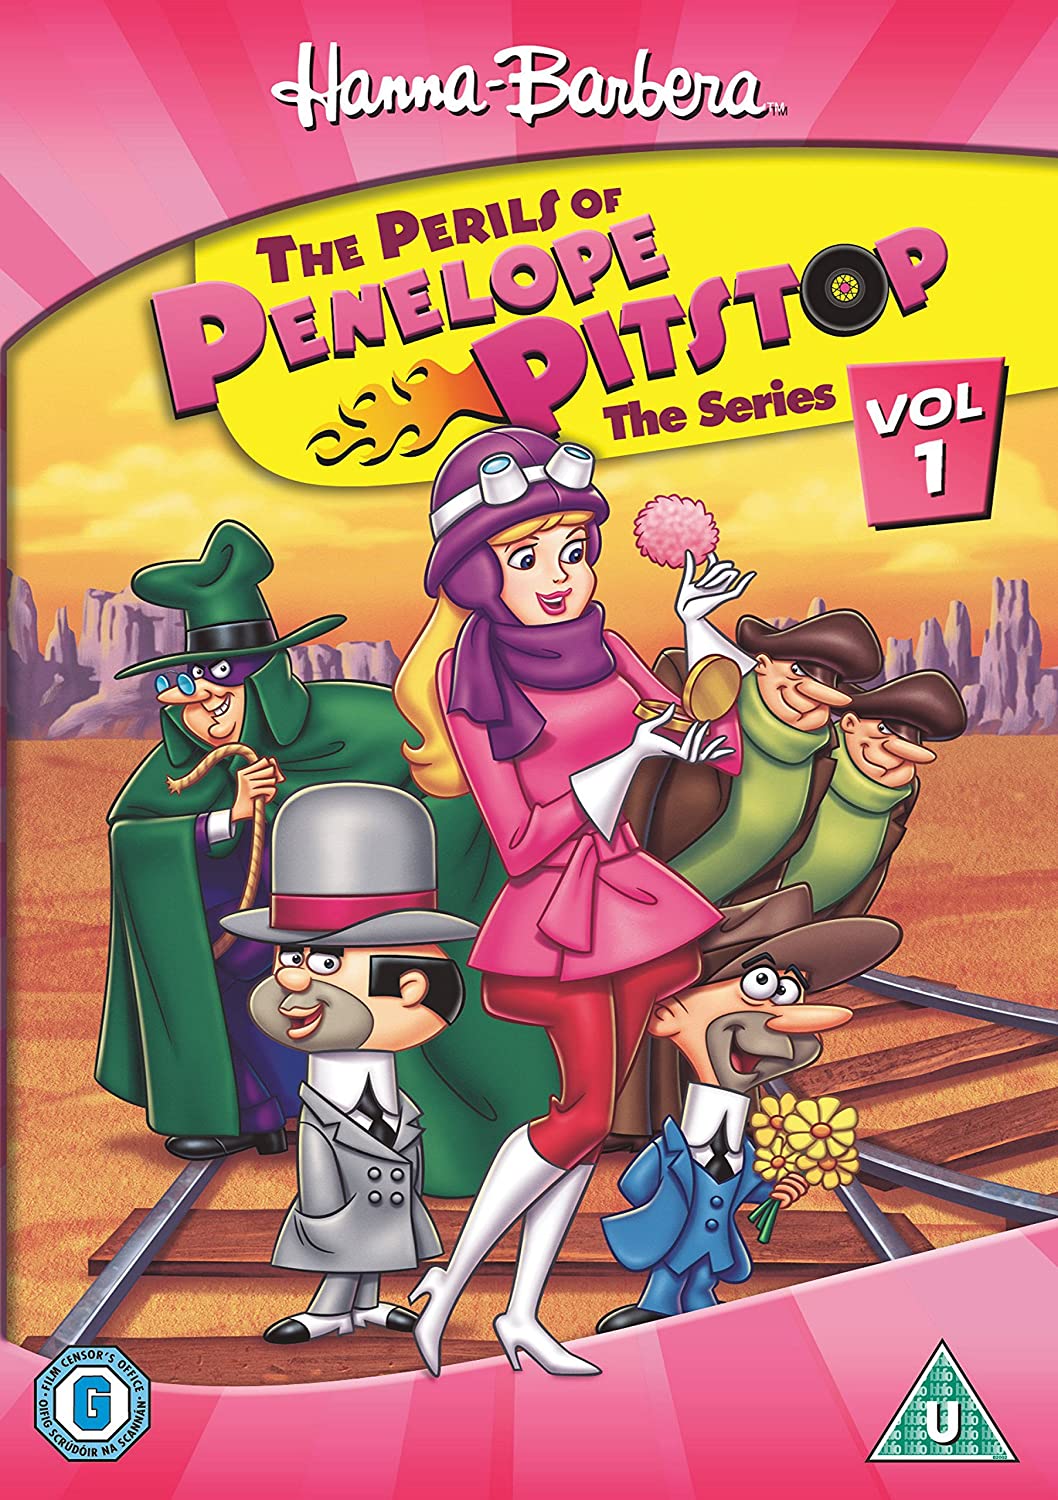 The Perils Of Penelope Pitstop: The Series - Volume 1 [Comedy ] [1969] [DVD]